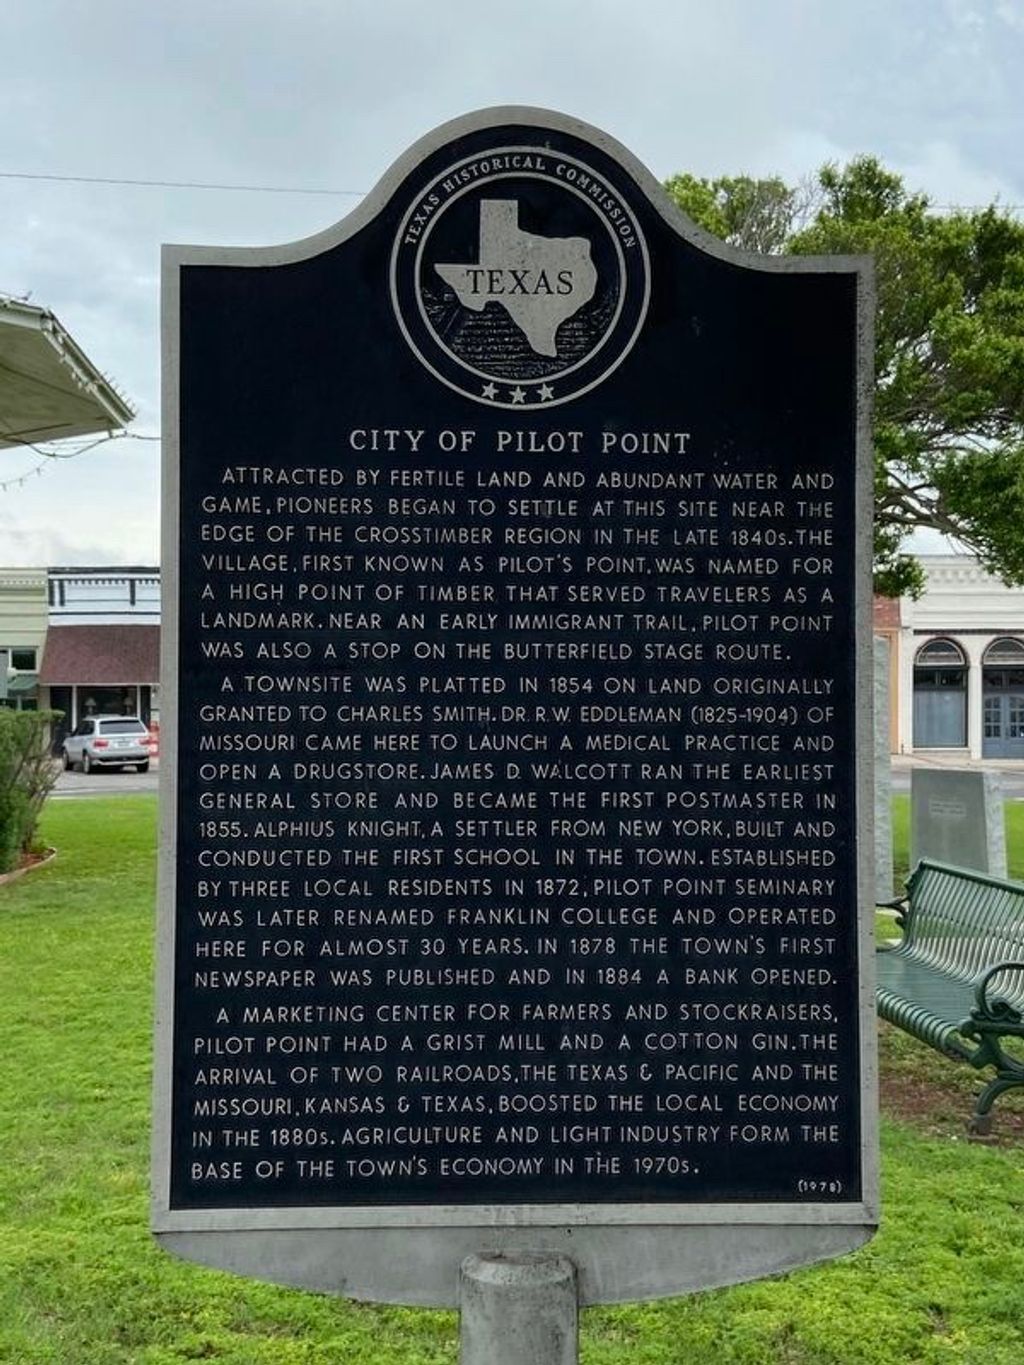 City of Pilot Point - Texas State Historical Marker